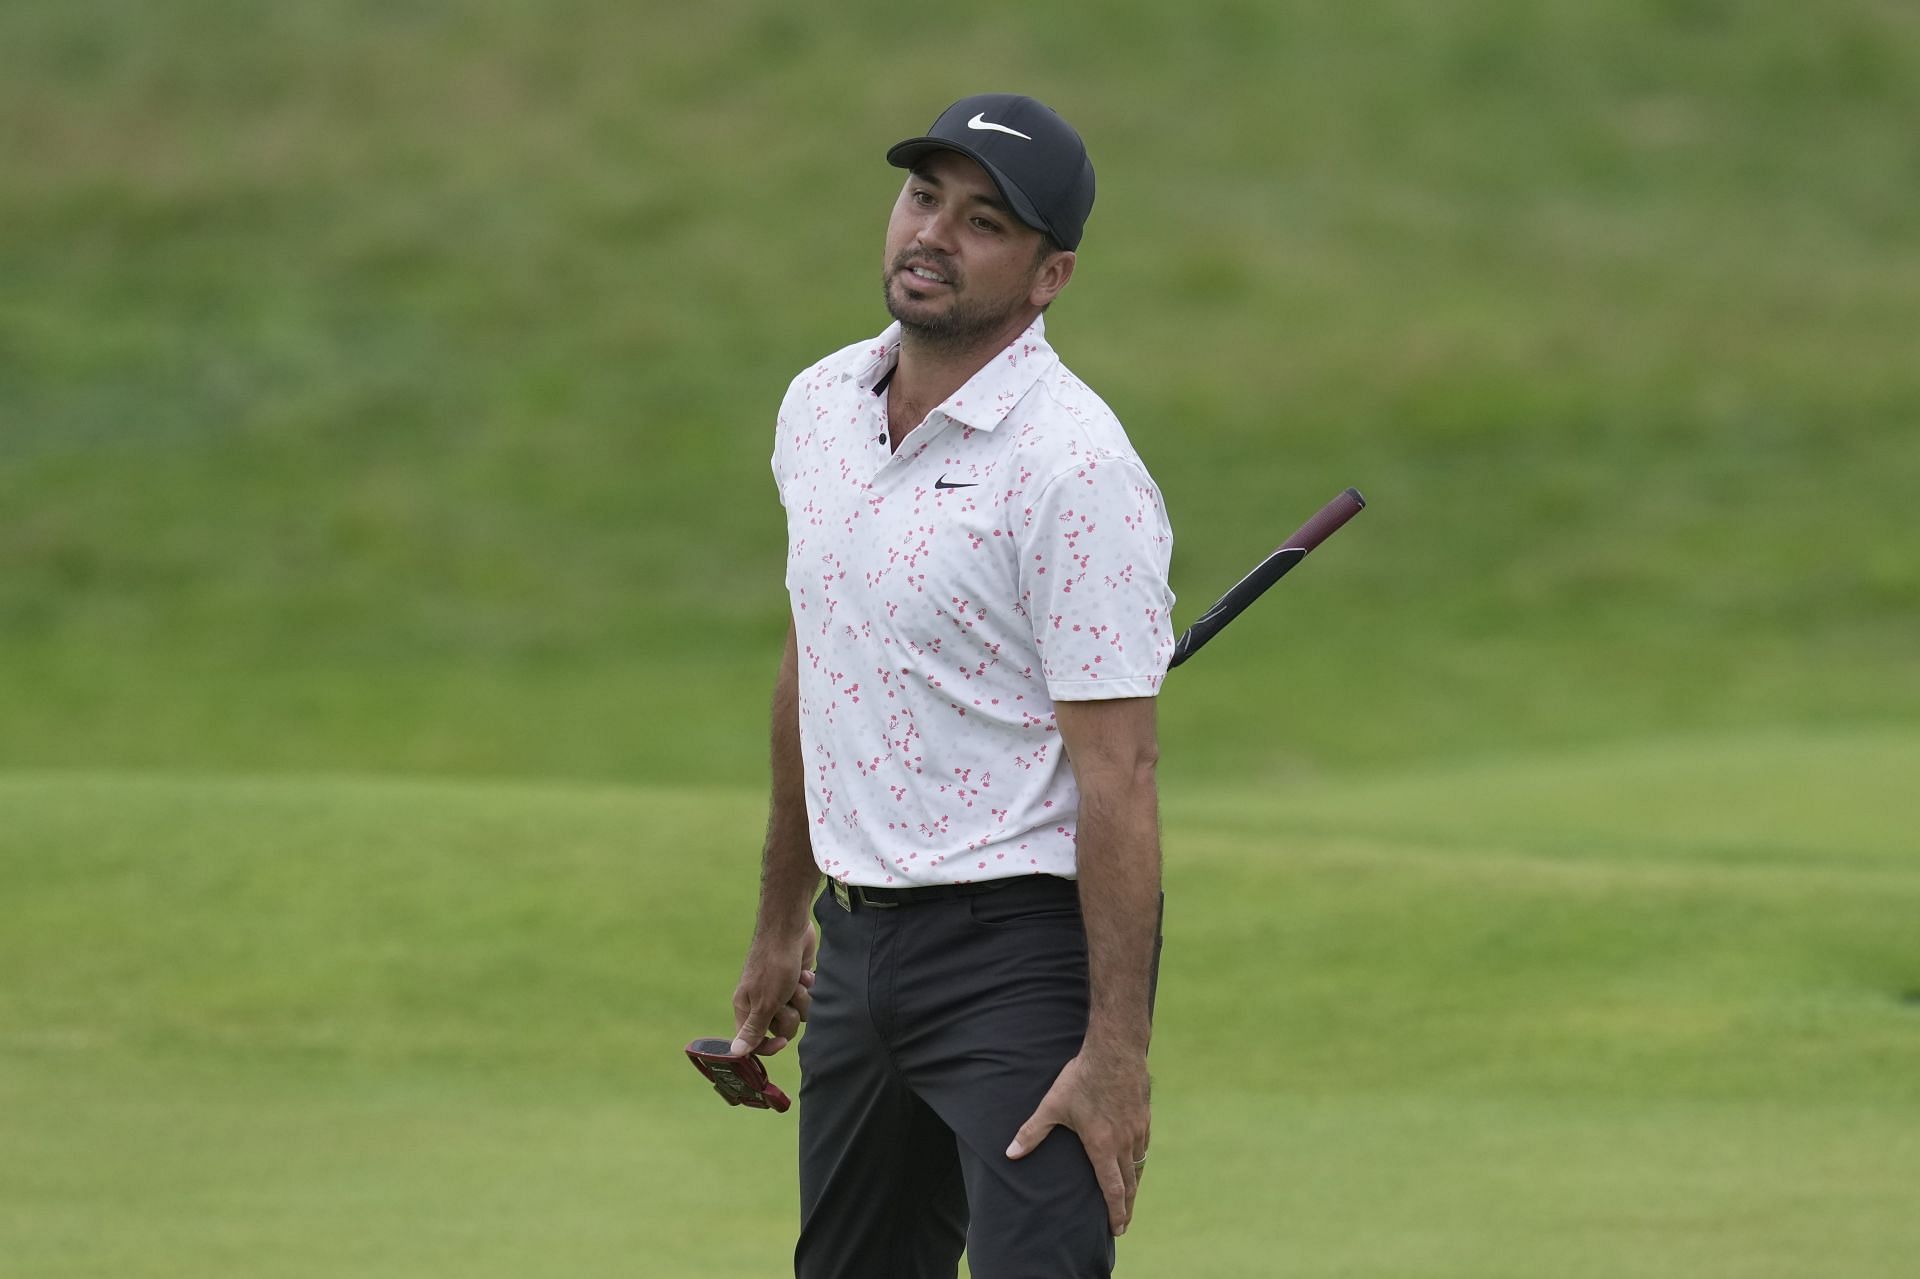 Jason Day might be earning a spot in the FedEx Cup Top 30 (Image via Getty).